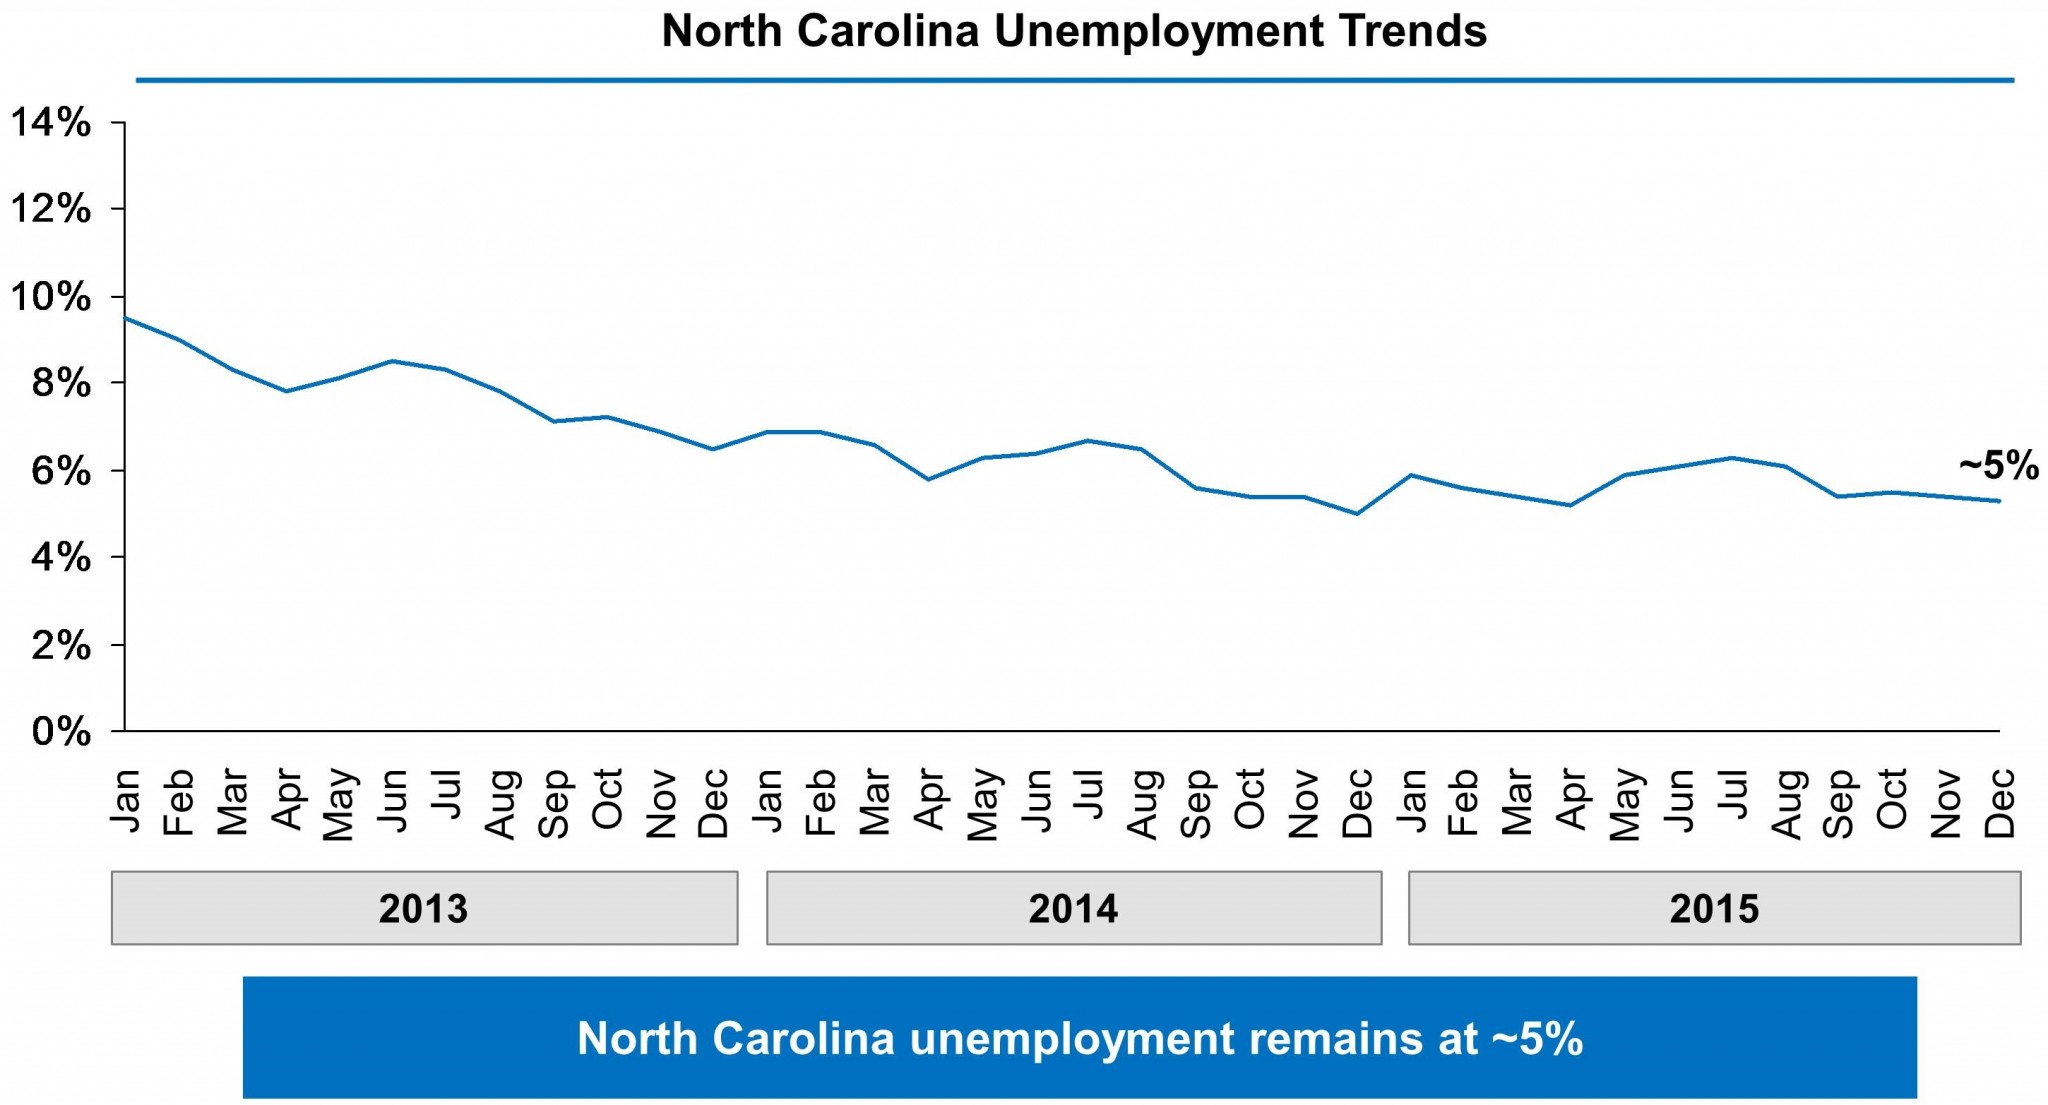 Chart showing North Carolina's unemployment rate falling from 10% in January 2013 to approximately 5% in December 2015.